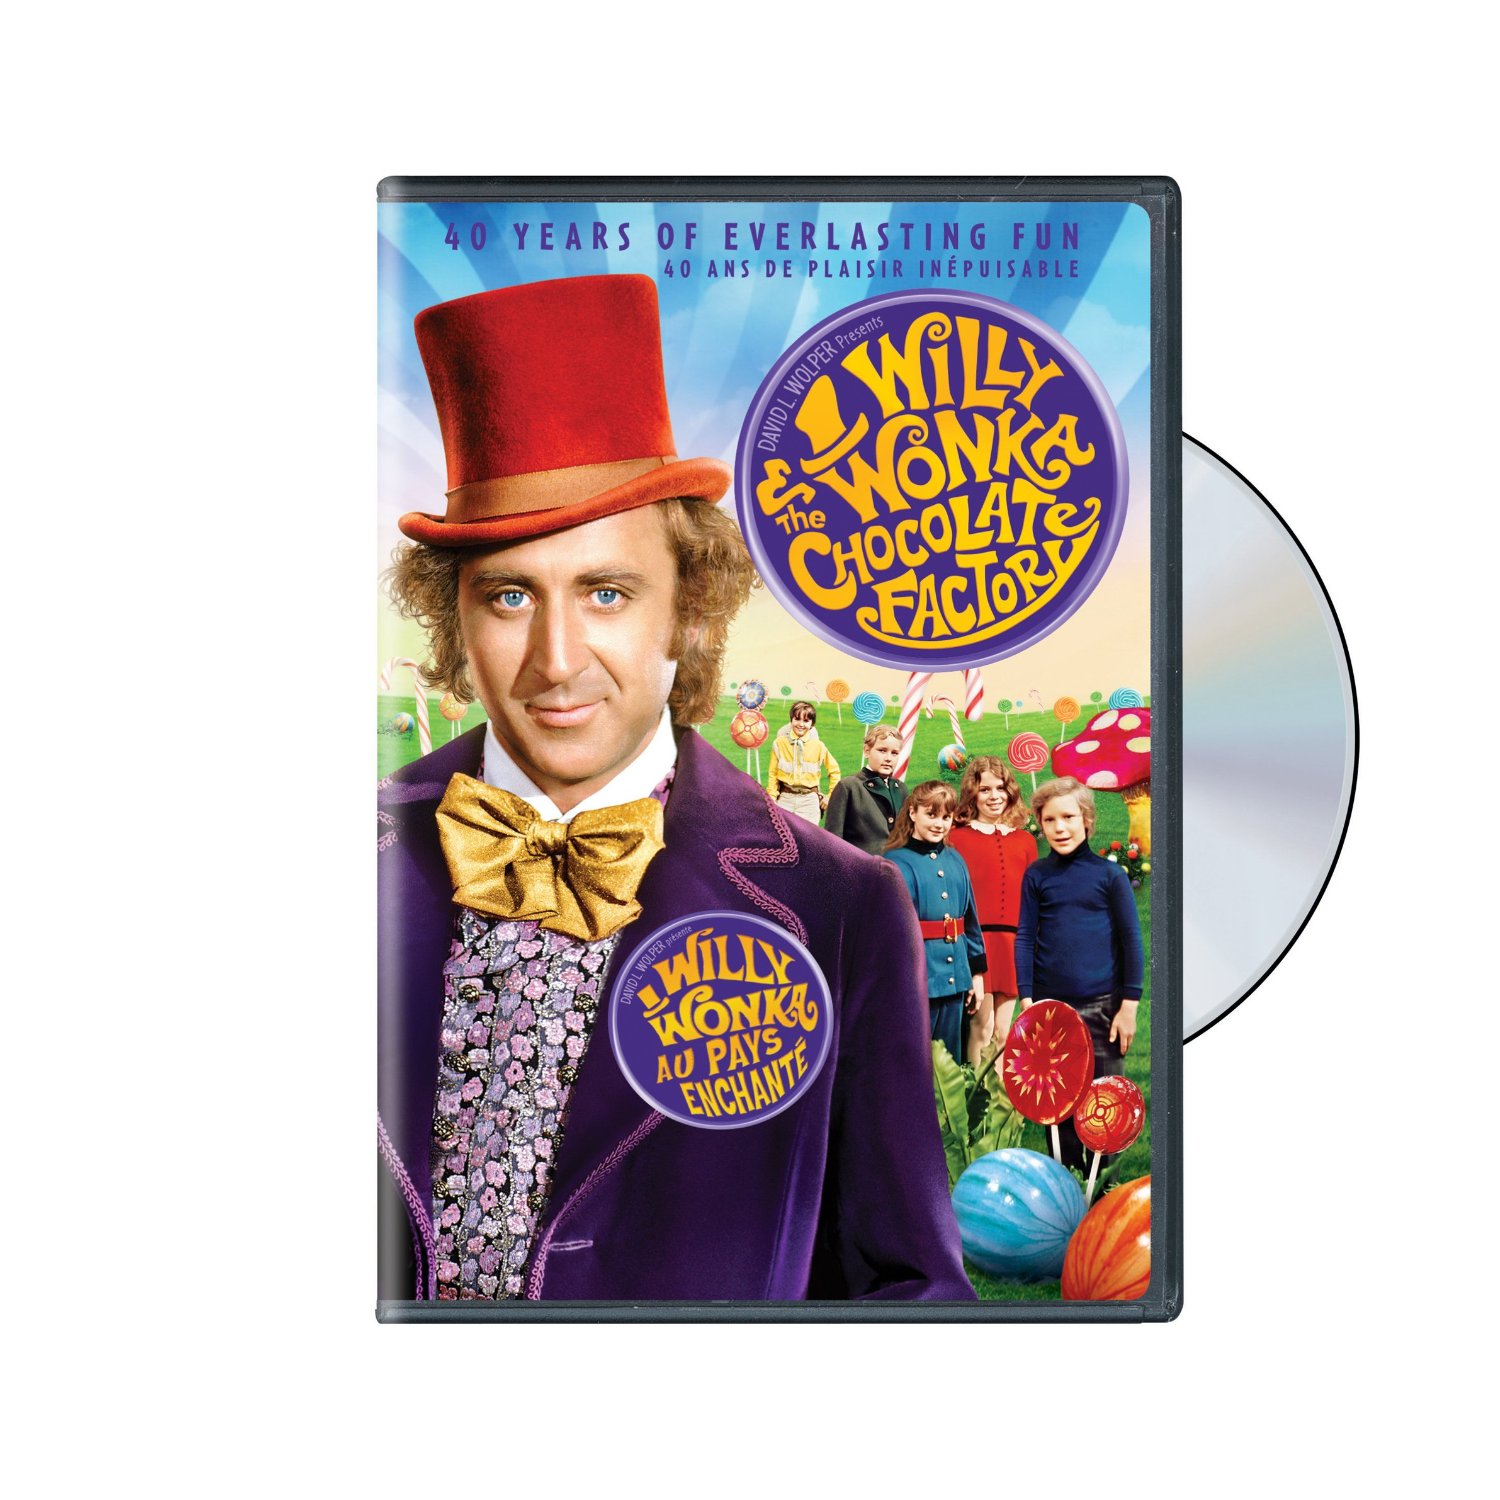 WILLY WONKA & THE CHOCOLATE FACTORY (1973) / (CAN)